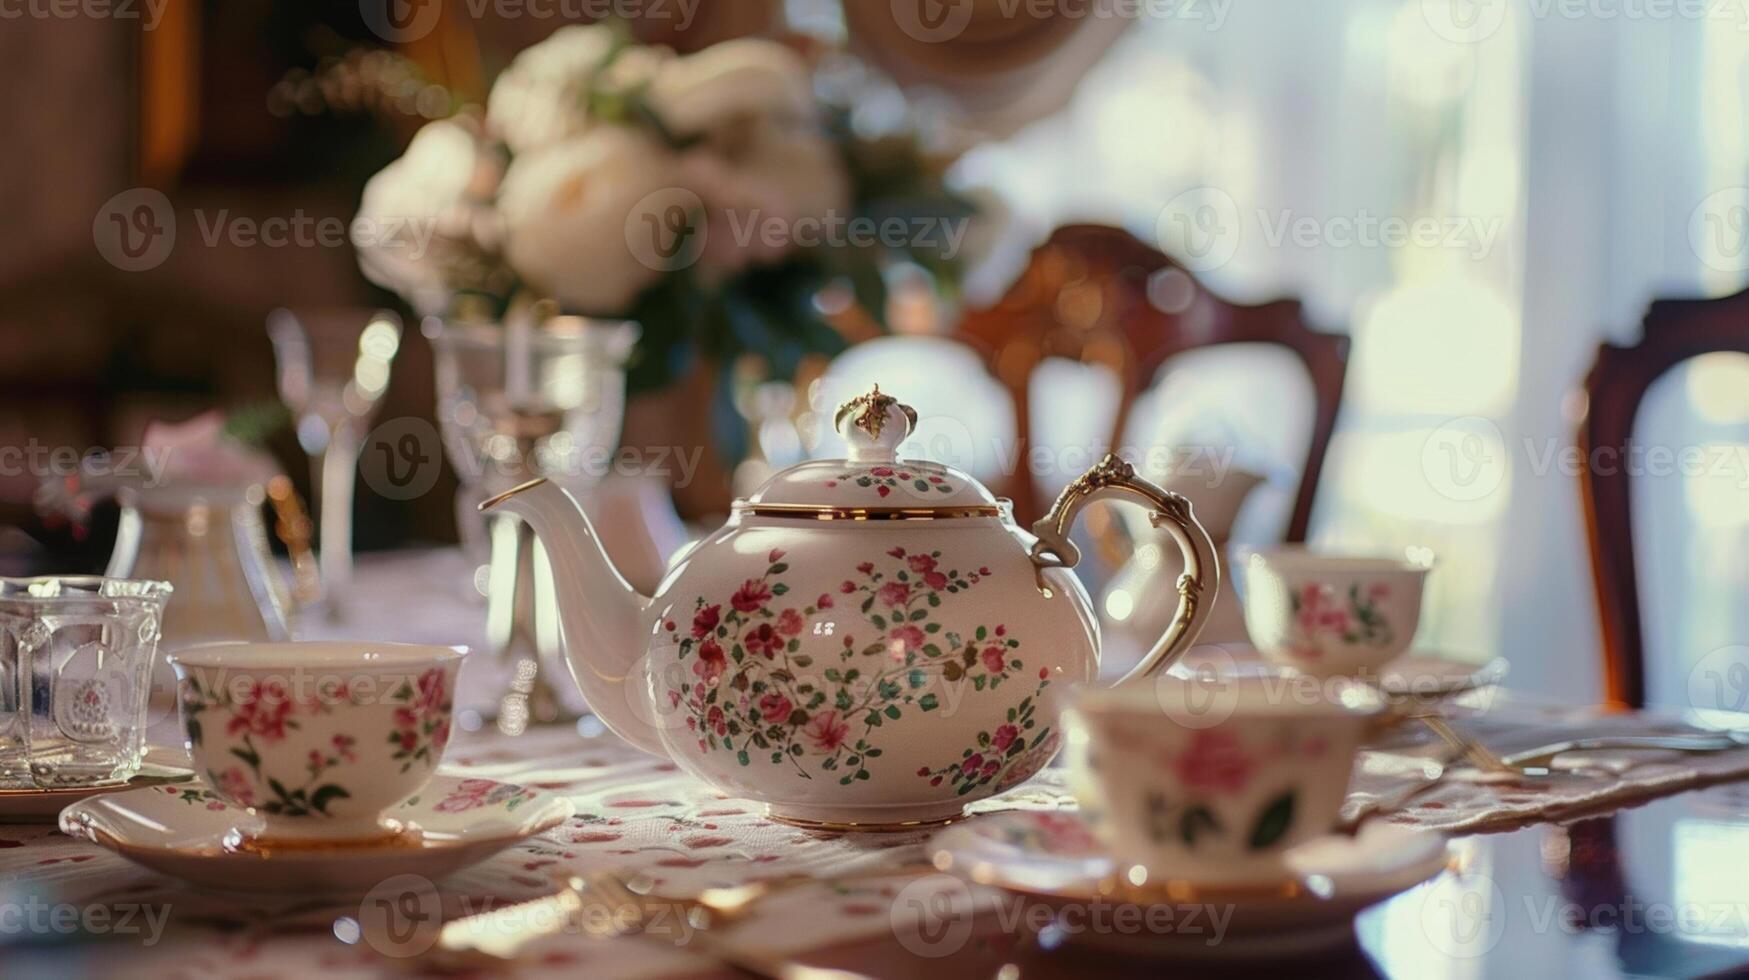 A classic teapot with a floral pattern sits at the center of the table inviting the teens to pour themselves another cup photo